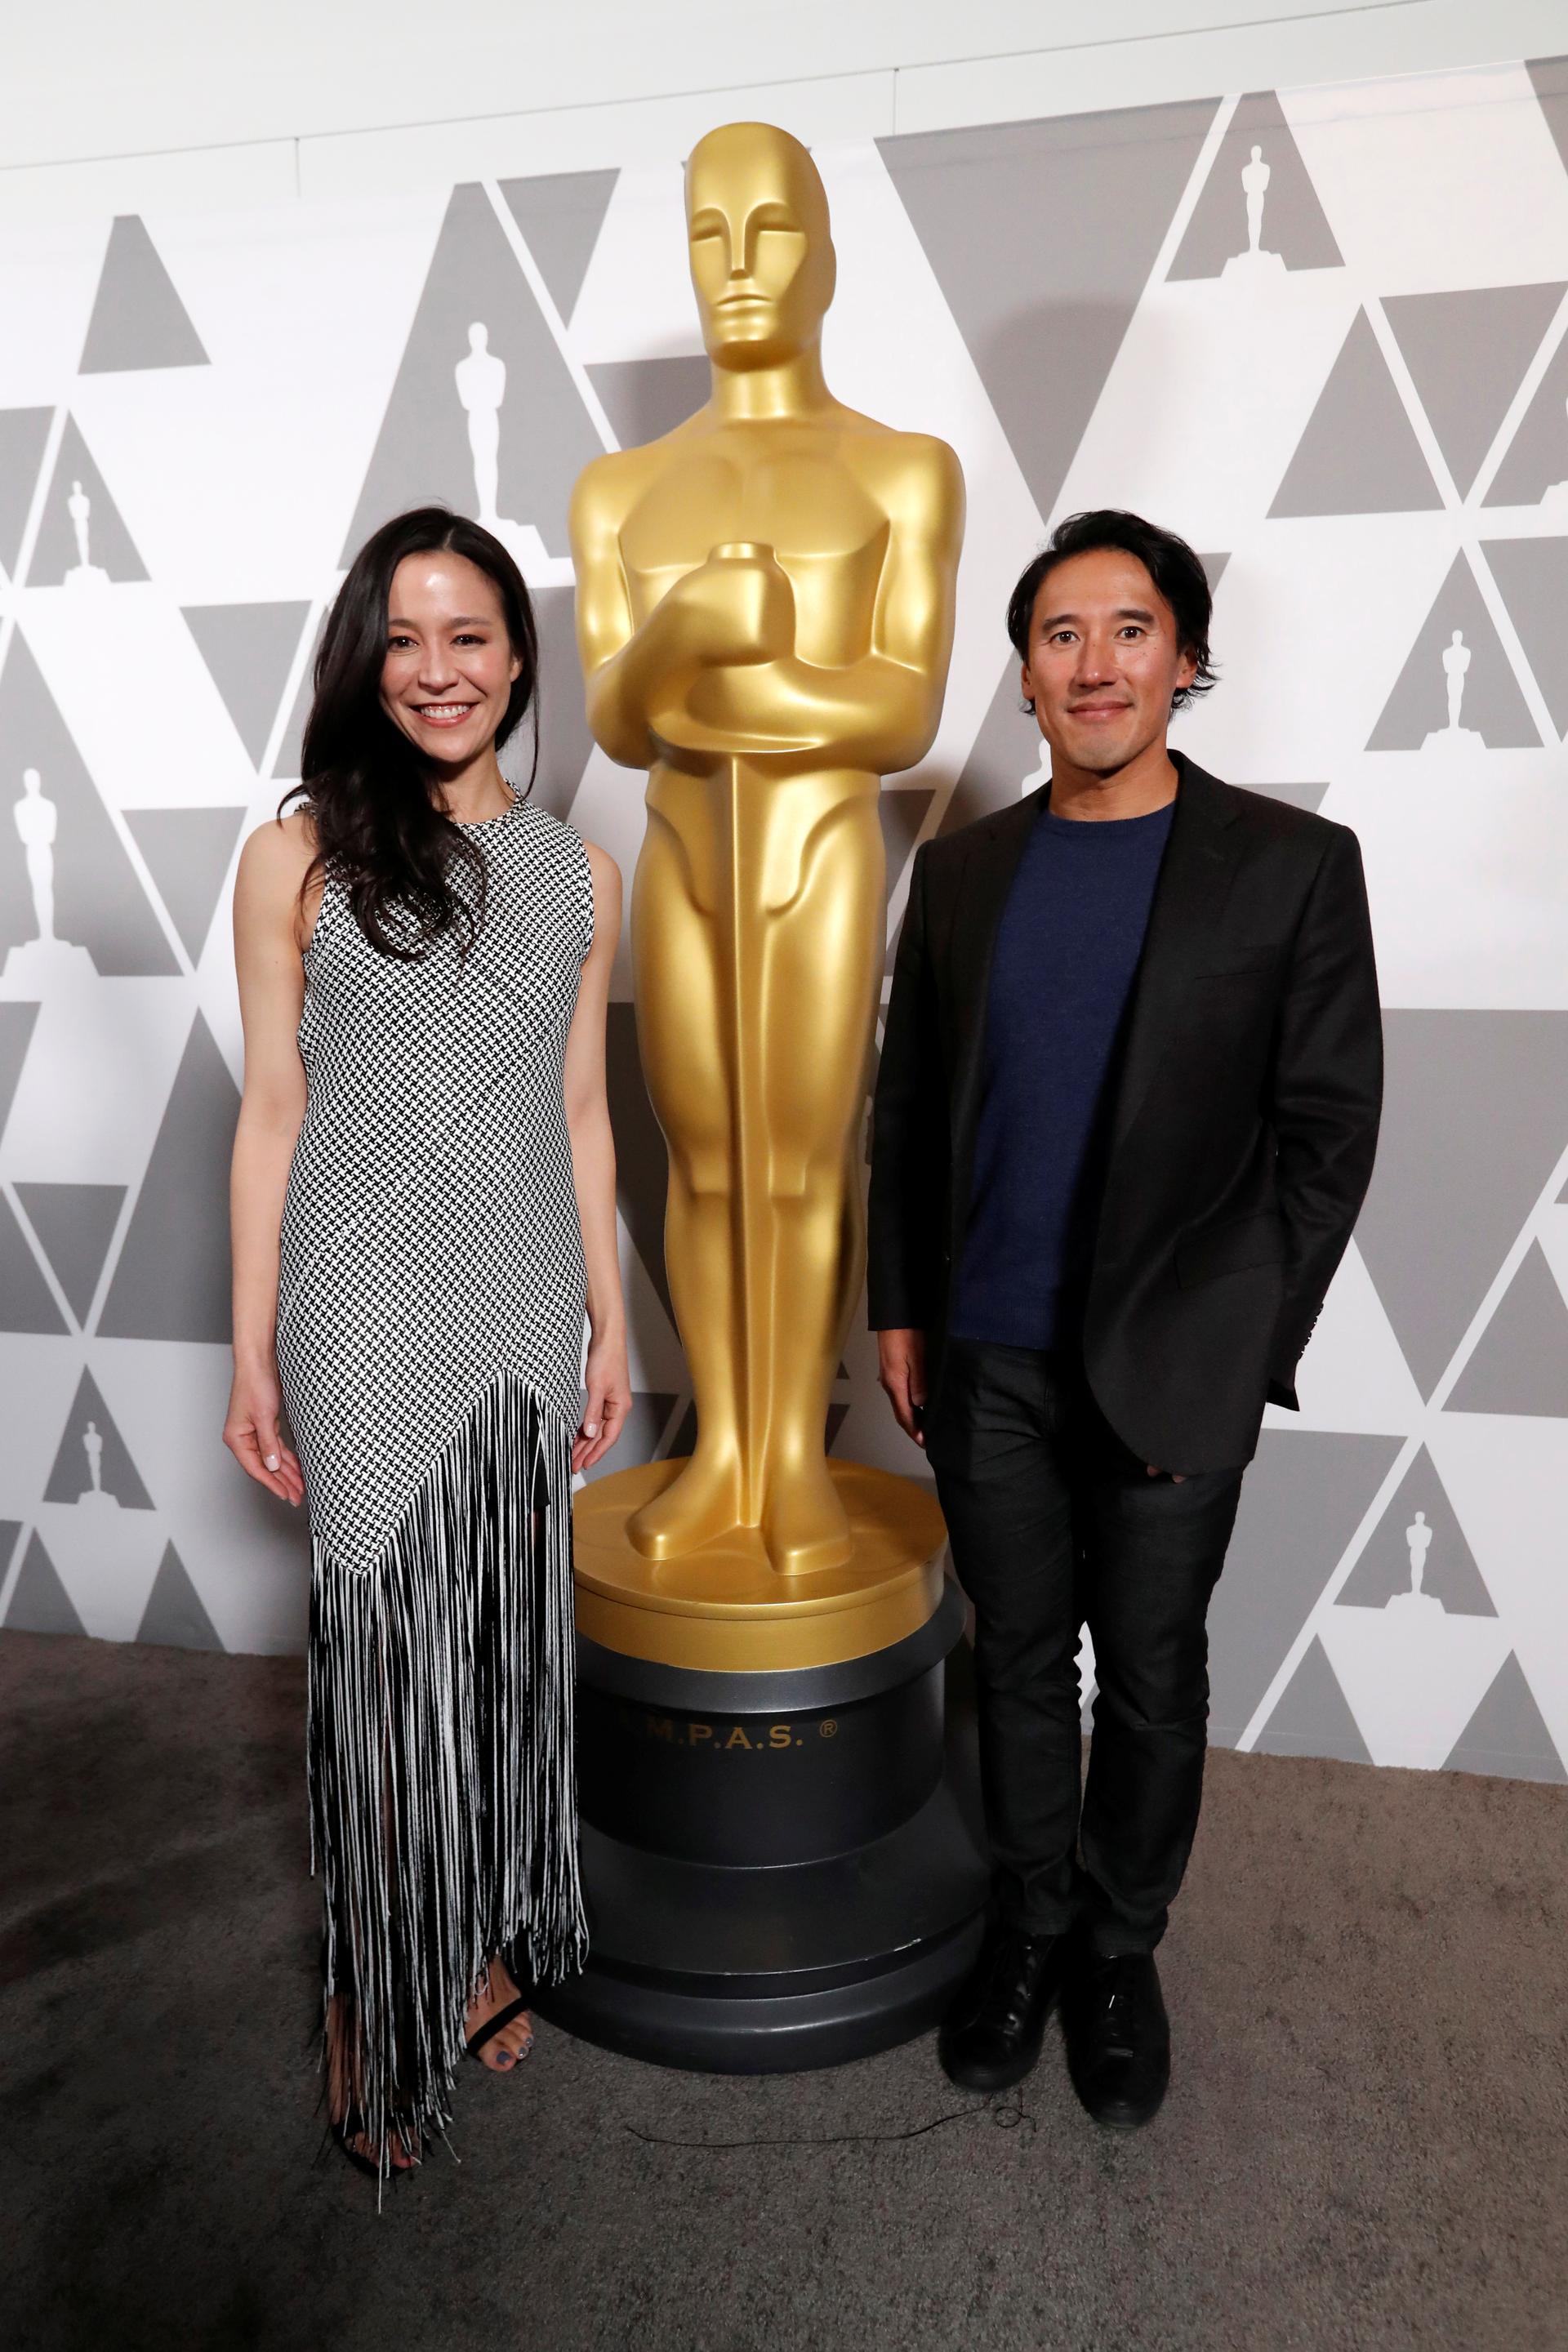 Jimmy Chin and Chai Vasarhalyi stand next to a human size Oscar statue